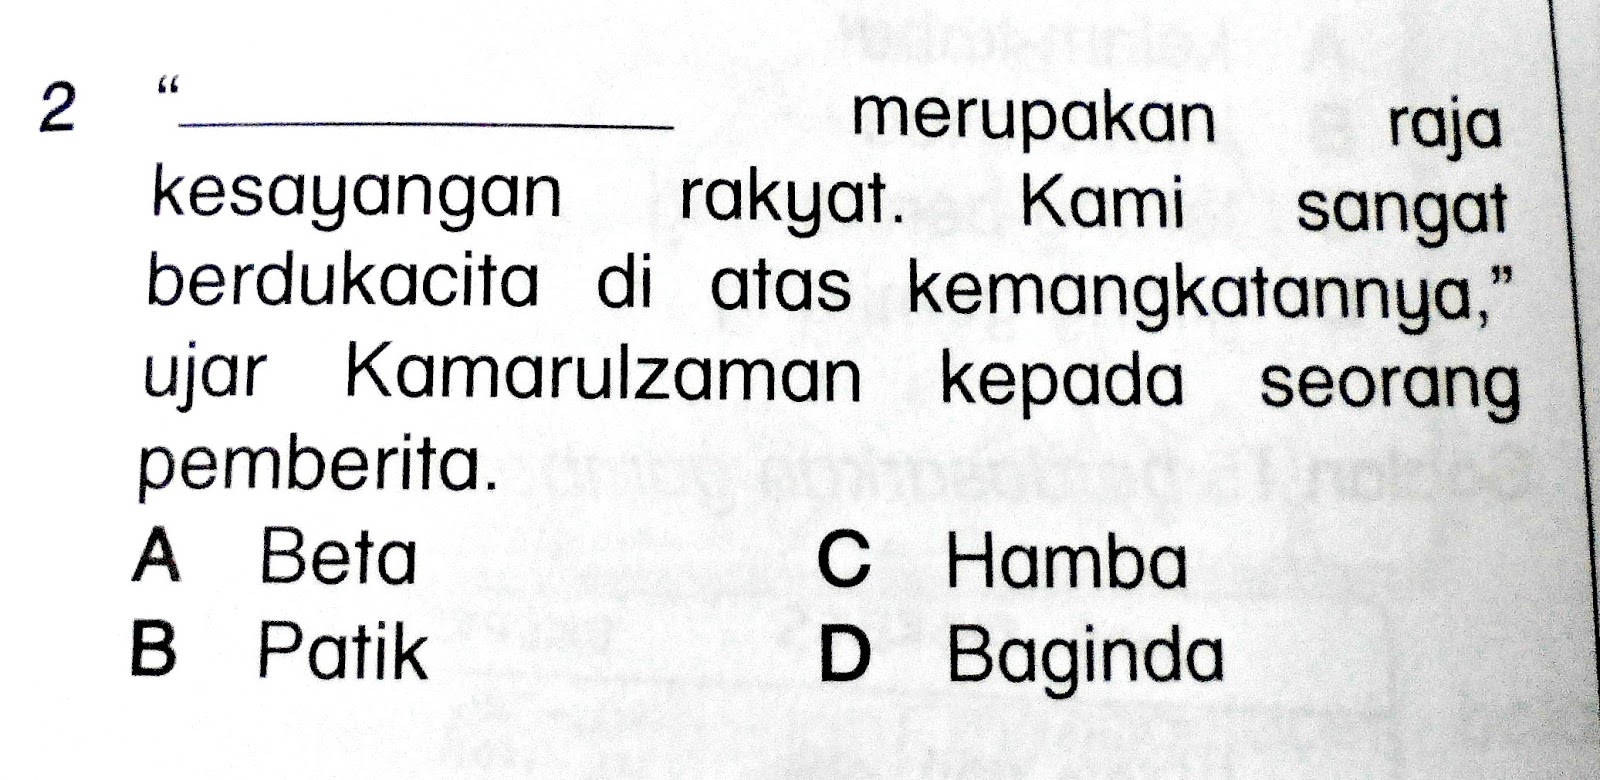 UPSR : Bahasa Istana ~ AUTISM - A GIFT FROM HEAVEN